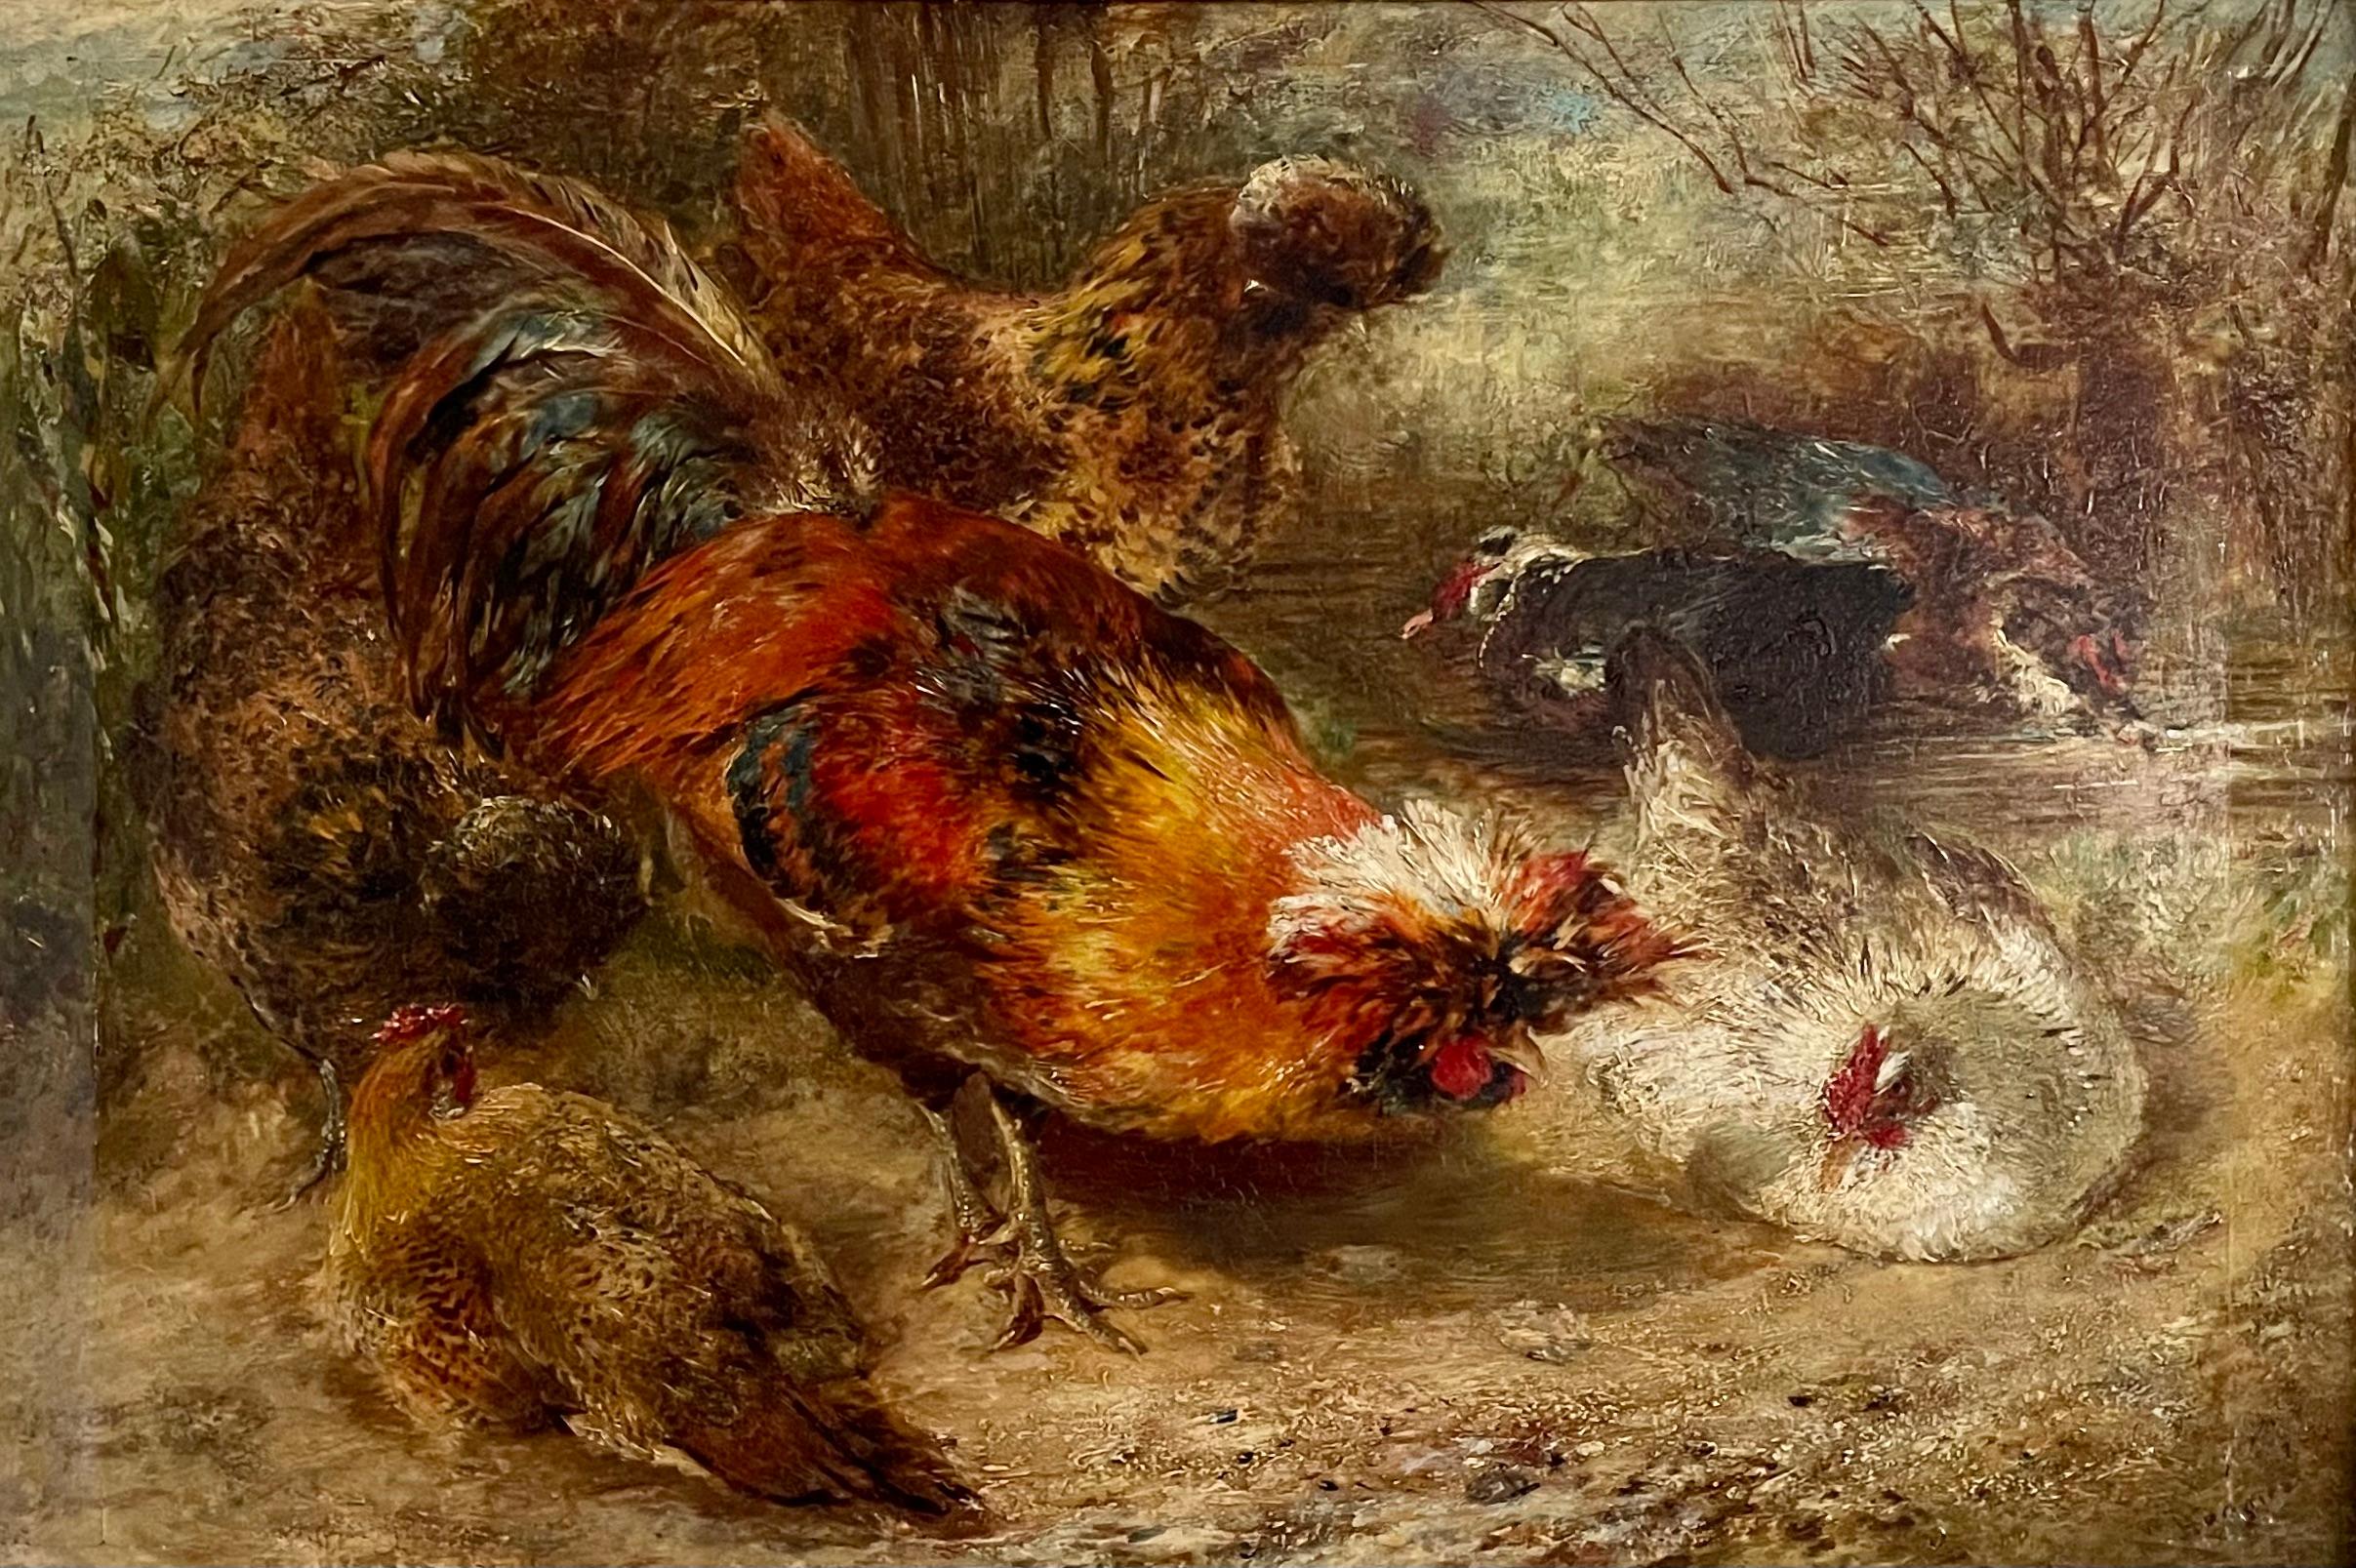 WILLIAM HUGGINS
(1820-1884)

Cockerel and Hens

Signed and dated l.r.: W Huggins 1880
Oil on board
Framed

31 by 46 cm., 12 ¼ by 18 in.
(frame size 44.5 by 59.5 cm., 17 ½  by 23 ½ in.)

Huggins was born in Liverpool and studied at the Liverpool